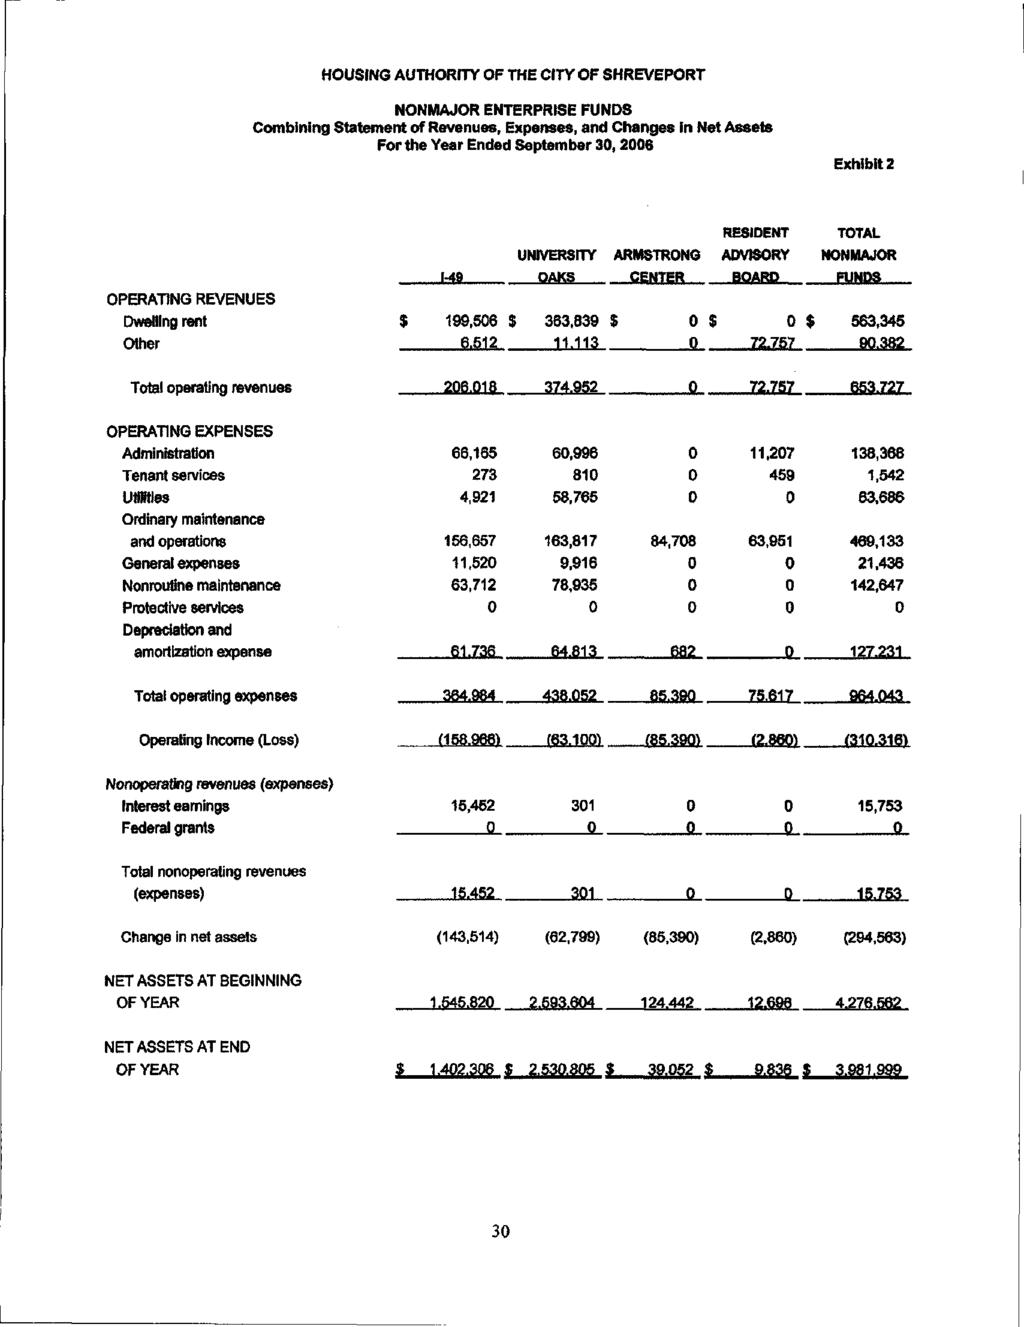 HOUSING AUTHORITY OF THE CITY OF SHREVEPORT NONMAJOR ENTERPRISE FUNDS Combining Statement of Revenues, Expenses, and Changes fn Net Assets For the Year Ended September 3,26 Exhibit 2 OPERATING